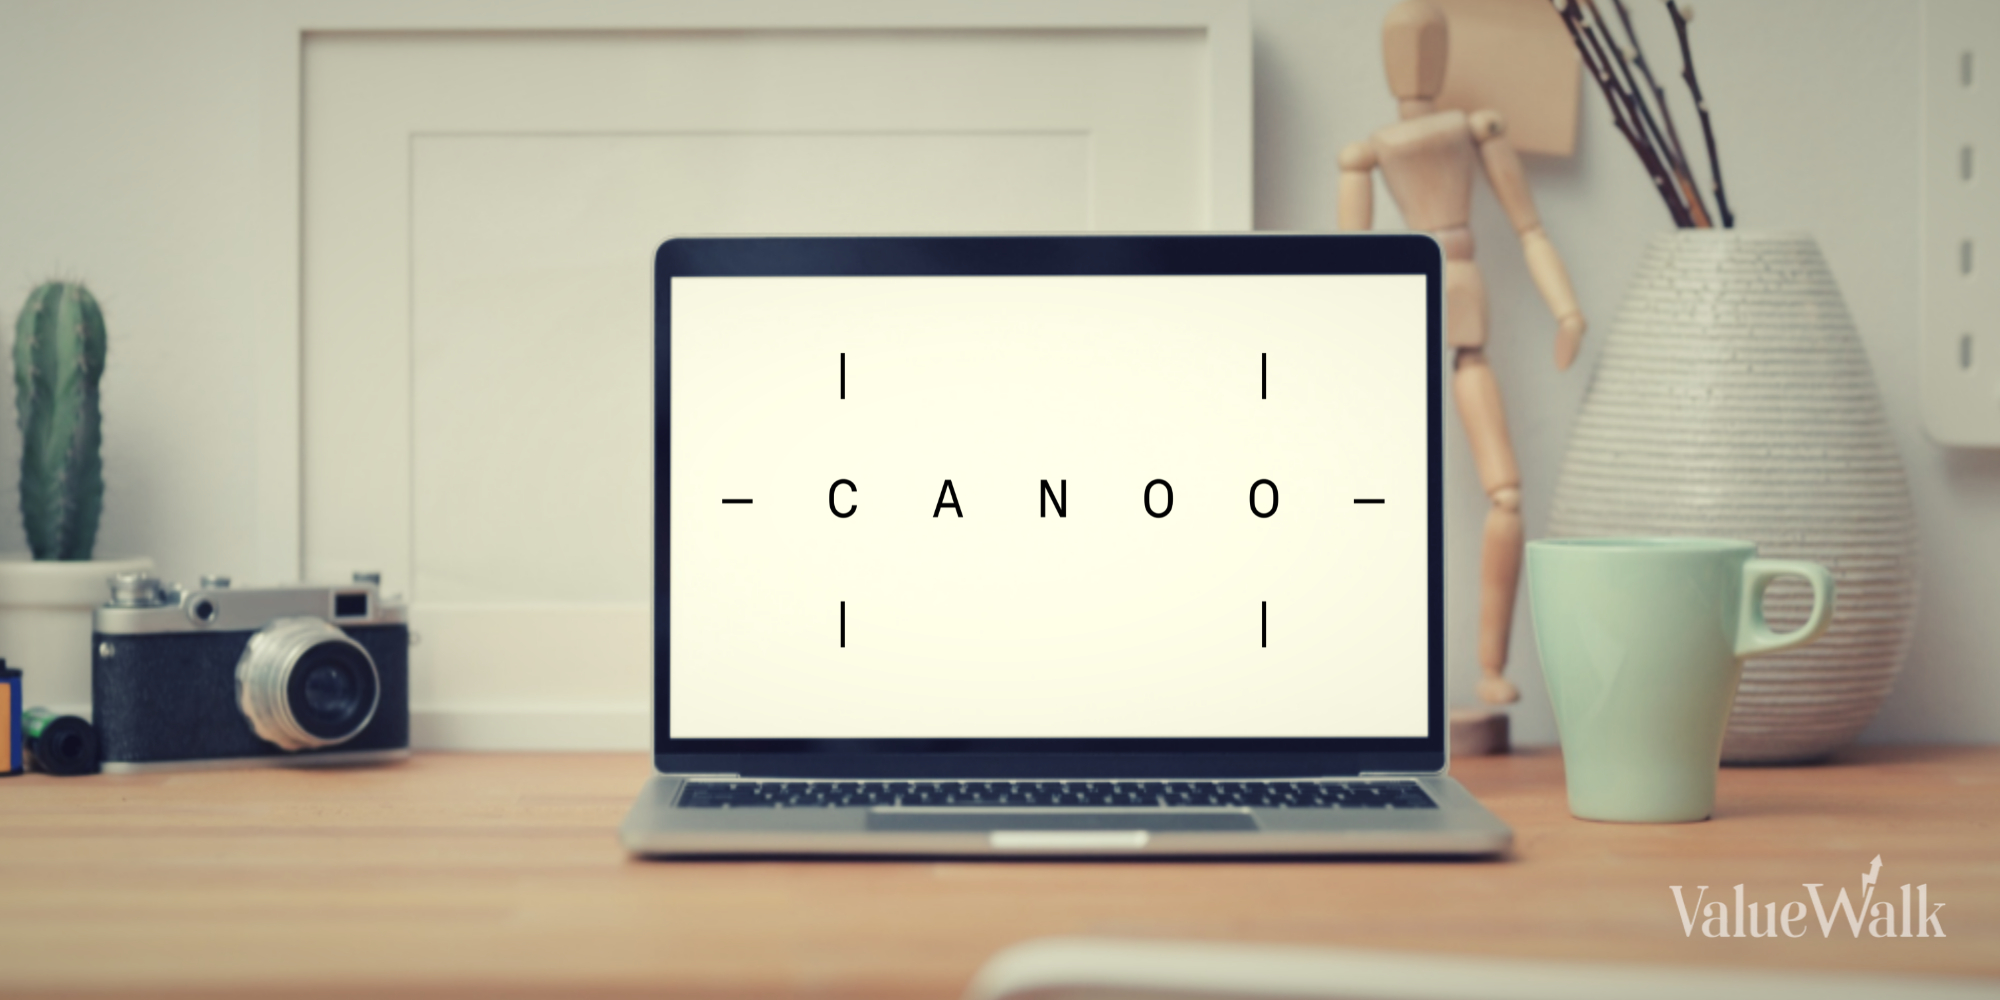 Canoo Stock: A Short-Squeeze Target for EV Enthusiasts